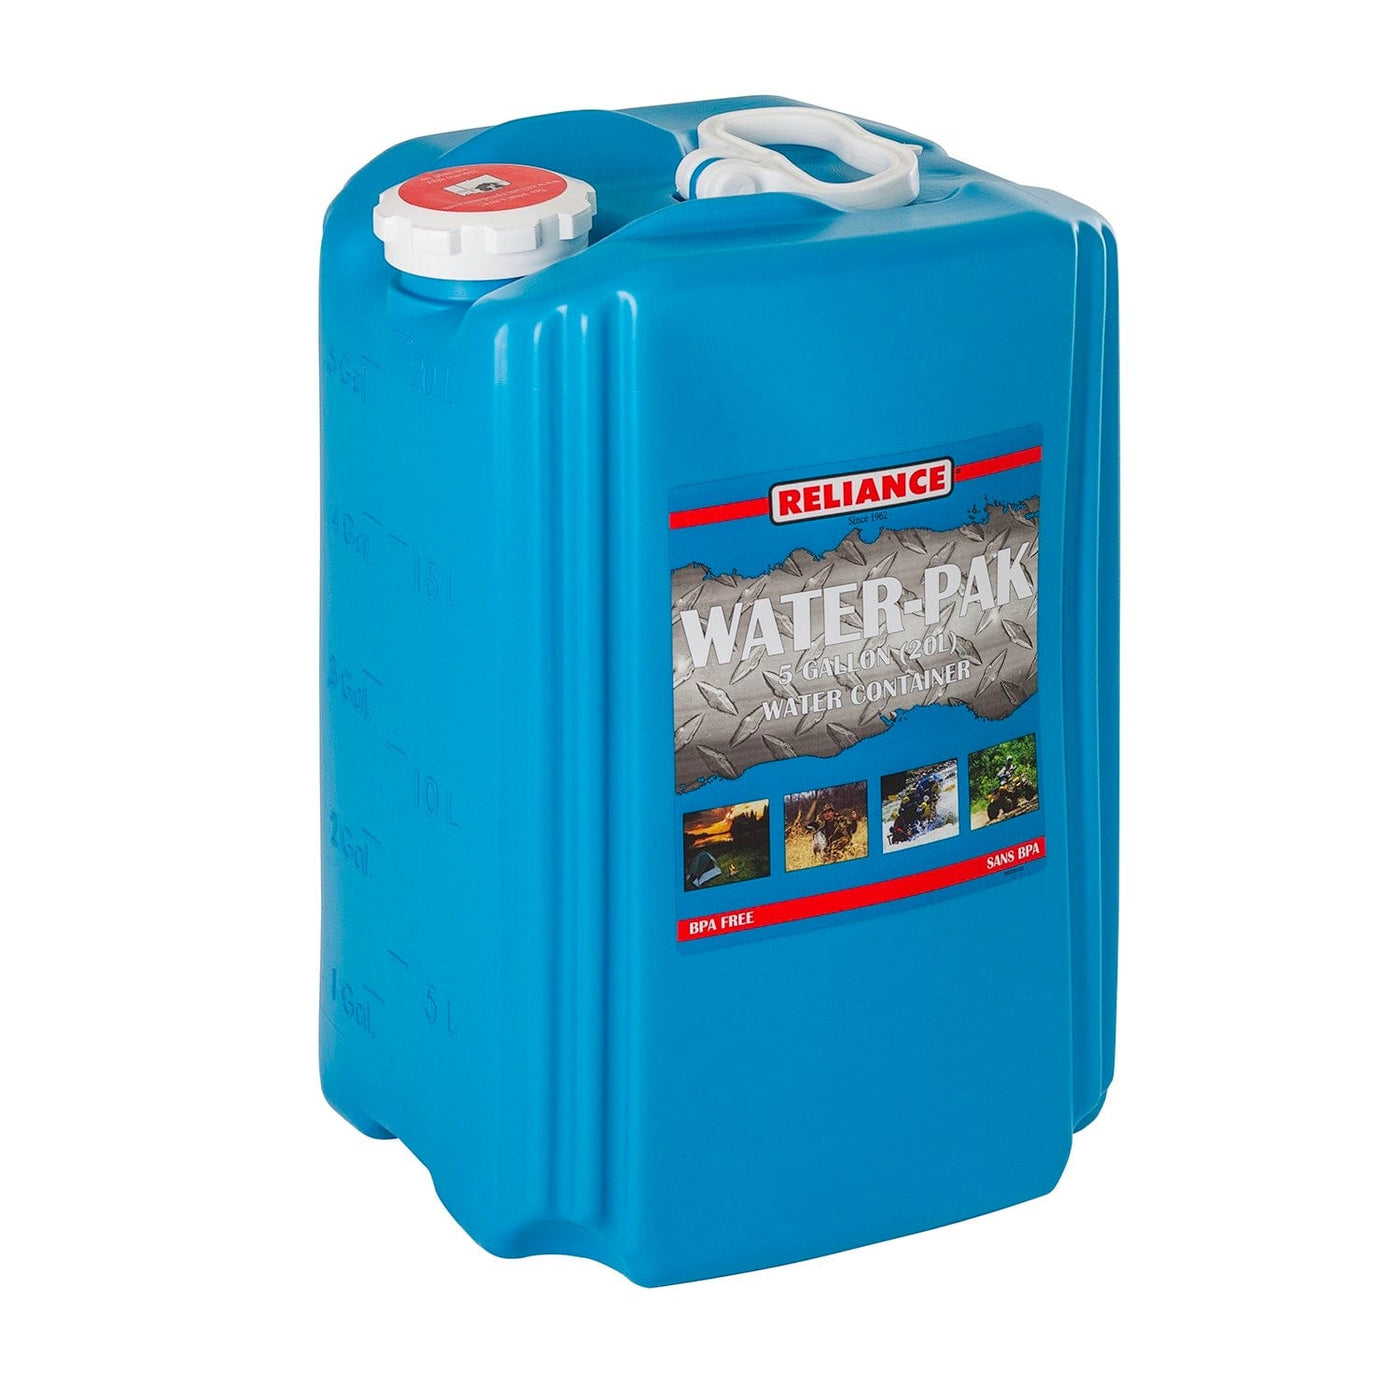 Reliance Reliance Aqua-Pak Water Container 5 Gallon 5 Gallon Camping And Outdoor